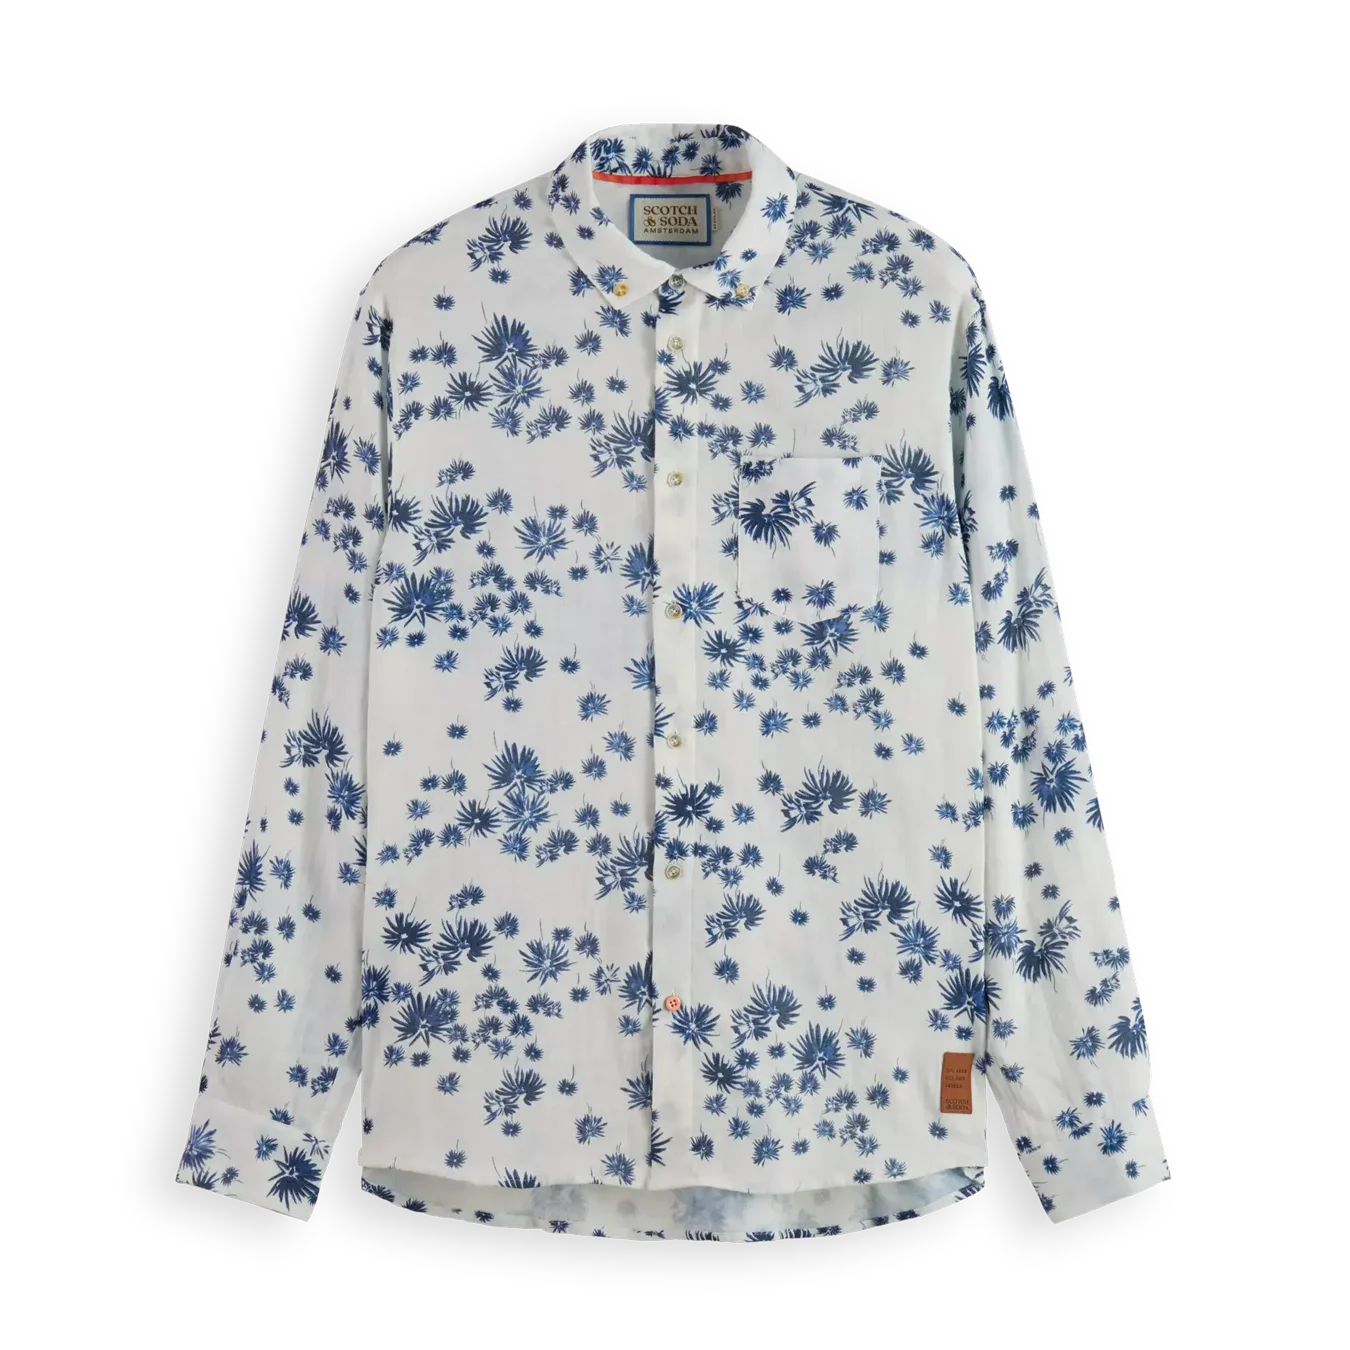 'Scotch & Soda Bonded Long Sleeve Shirt in Prints and Checks' in 'White Fireworks' colour